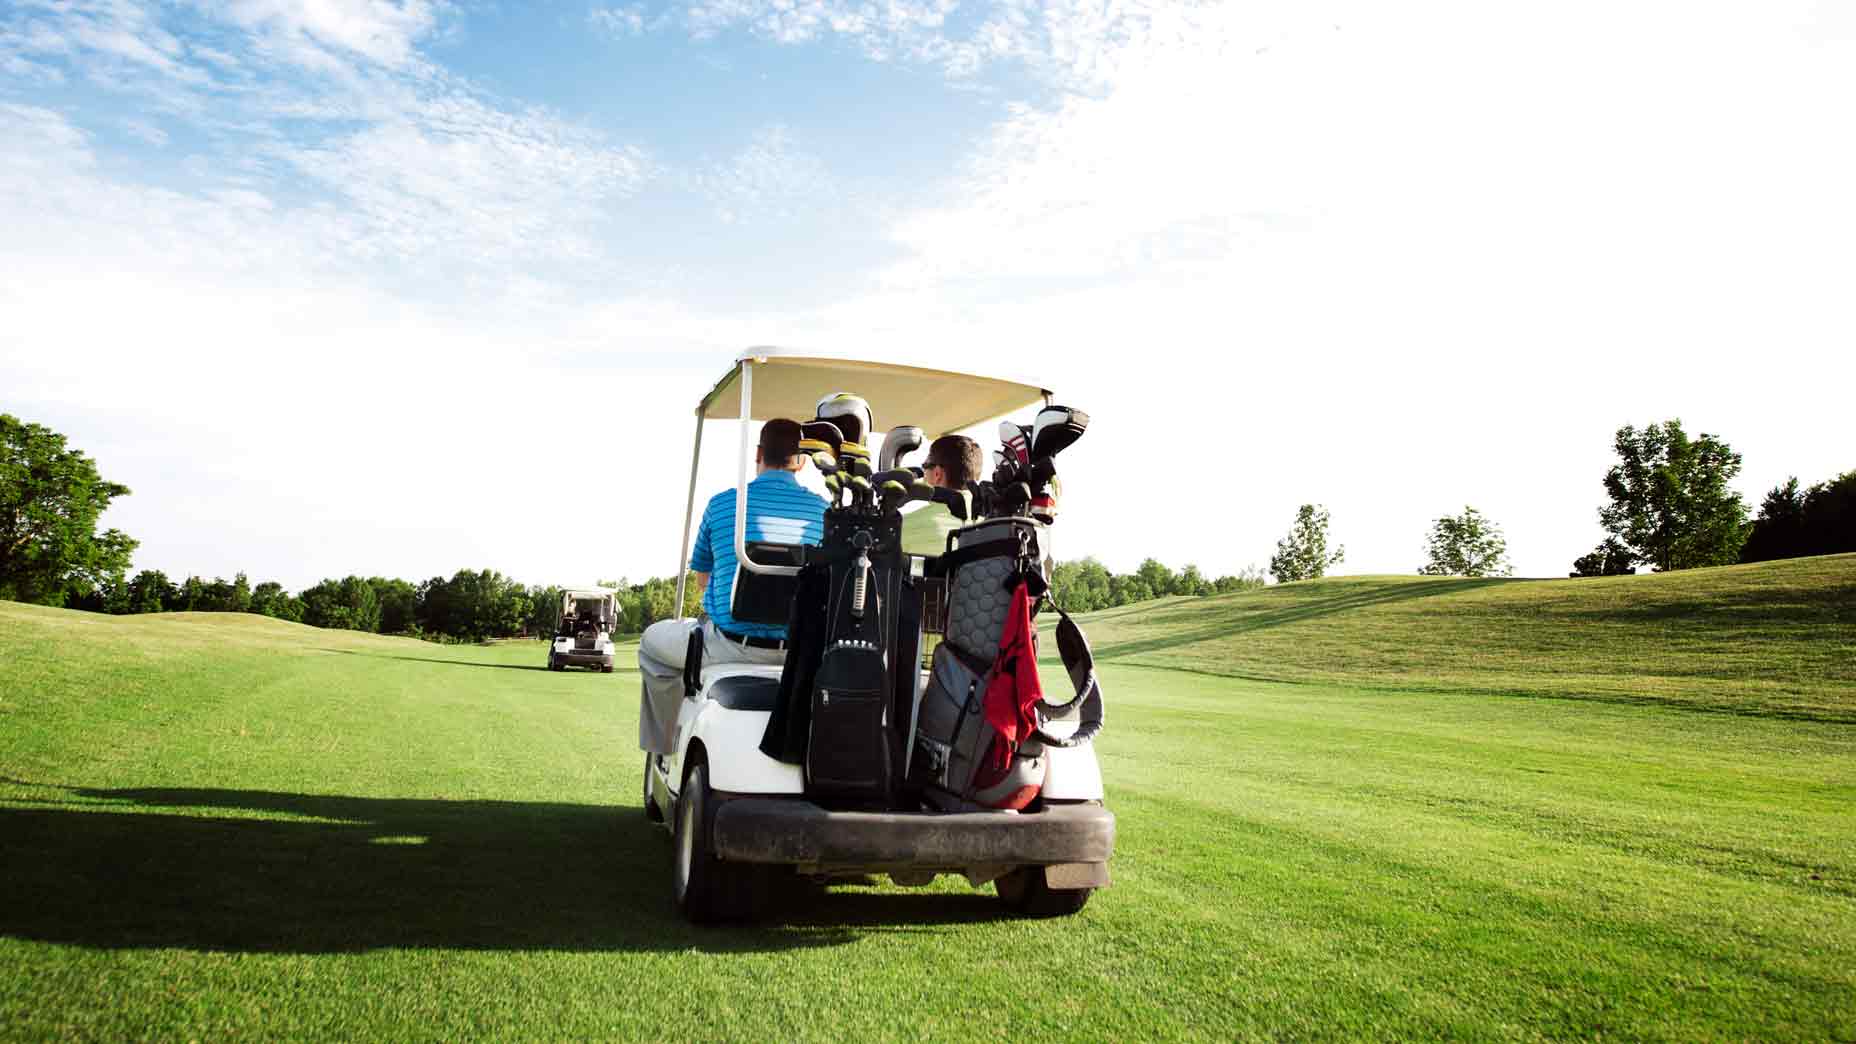 Golf cart accessories to make your golf experience more enjoyable